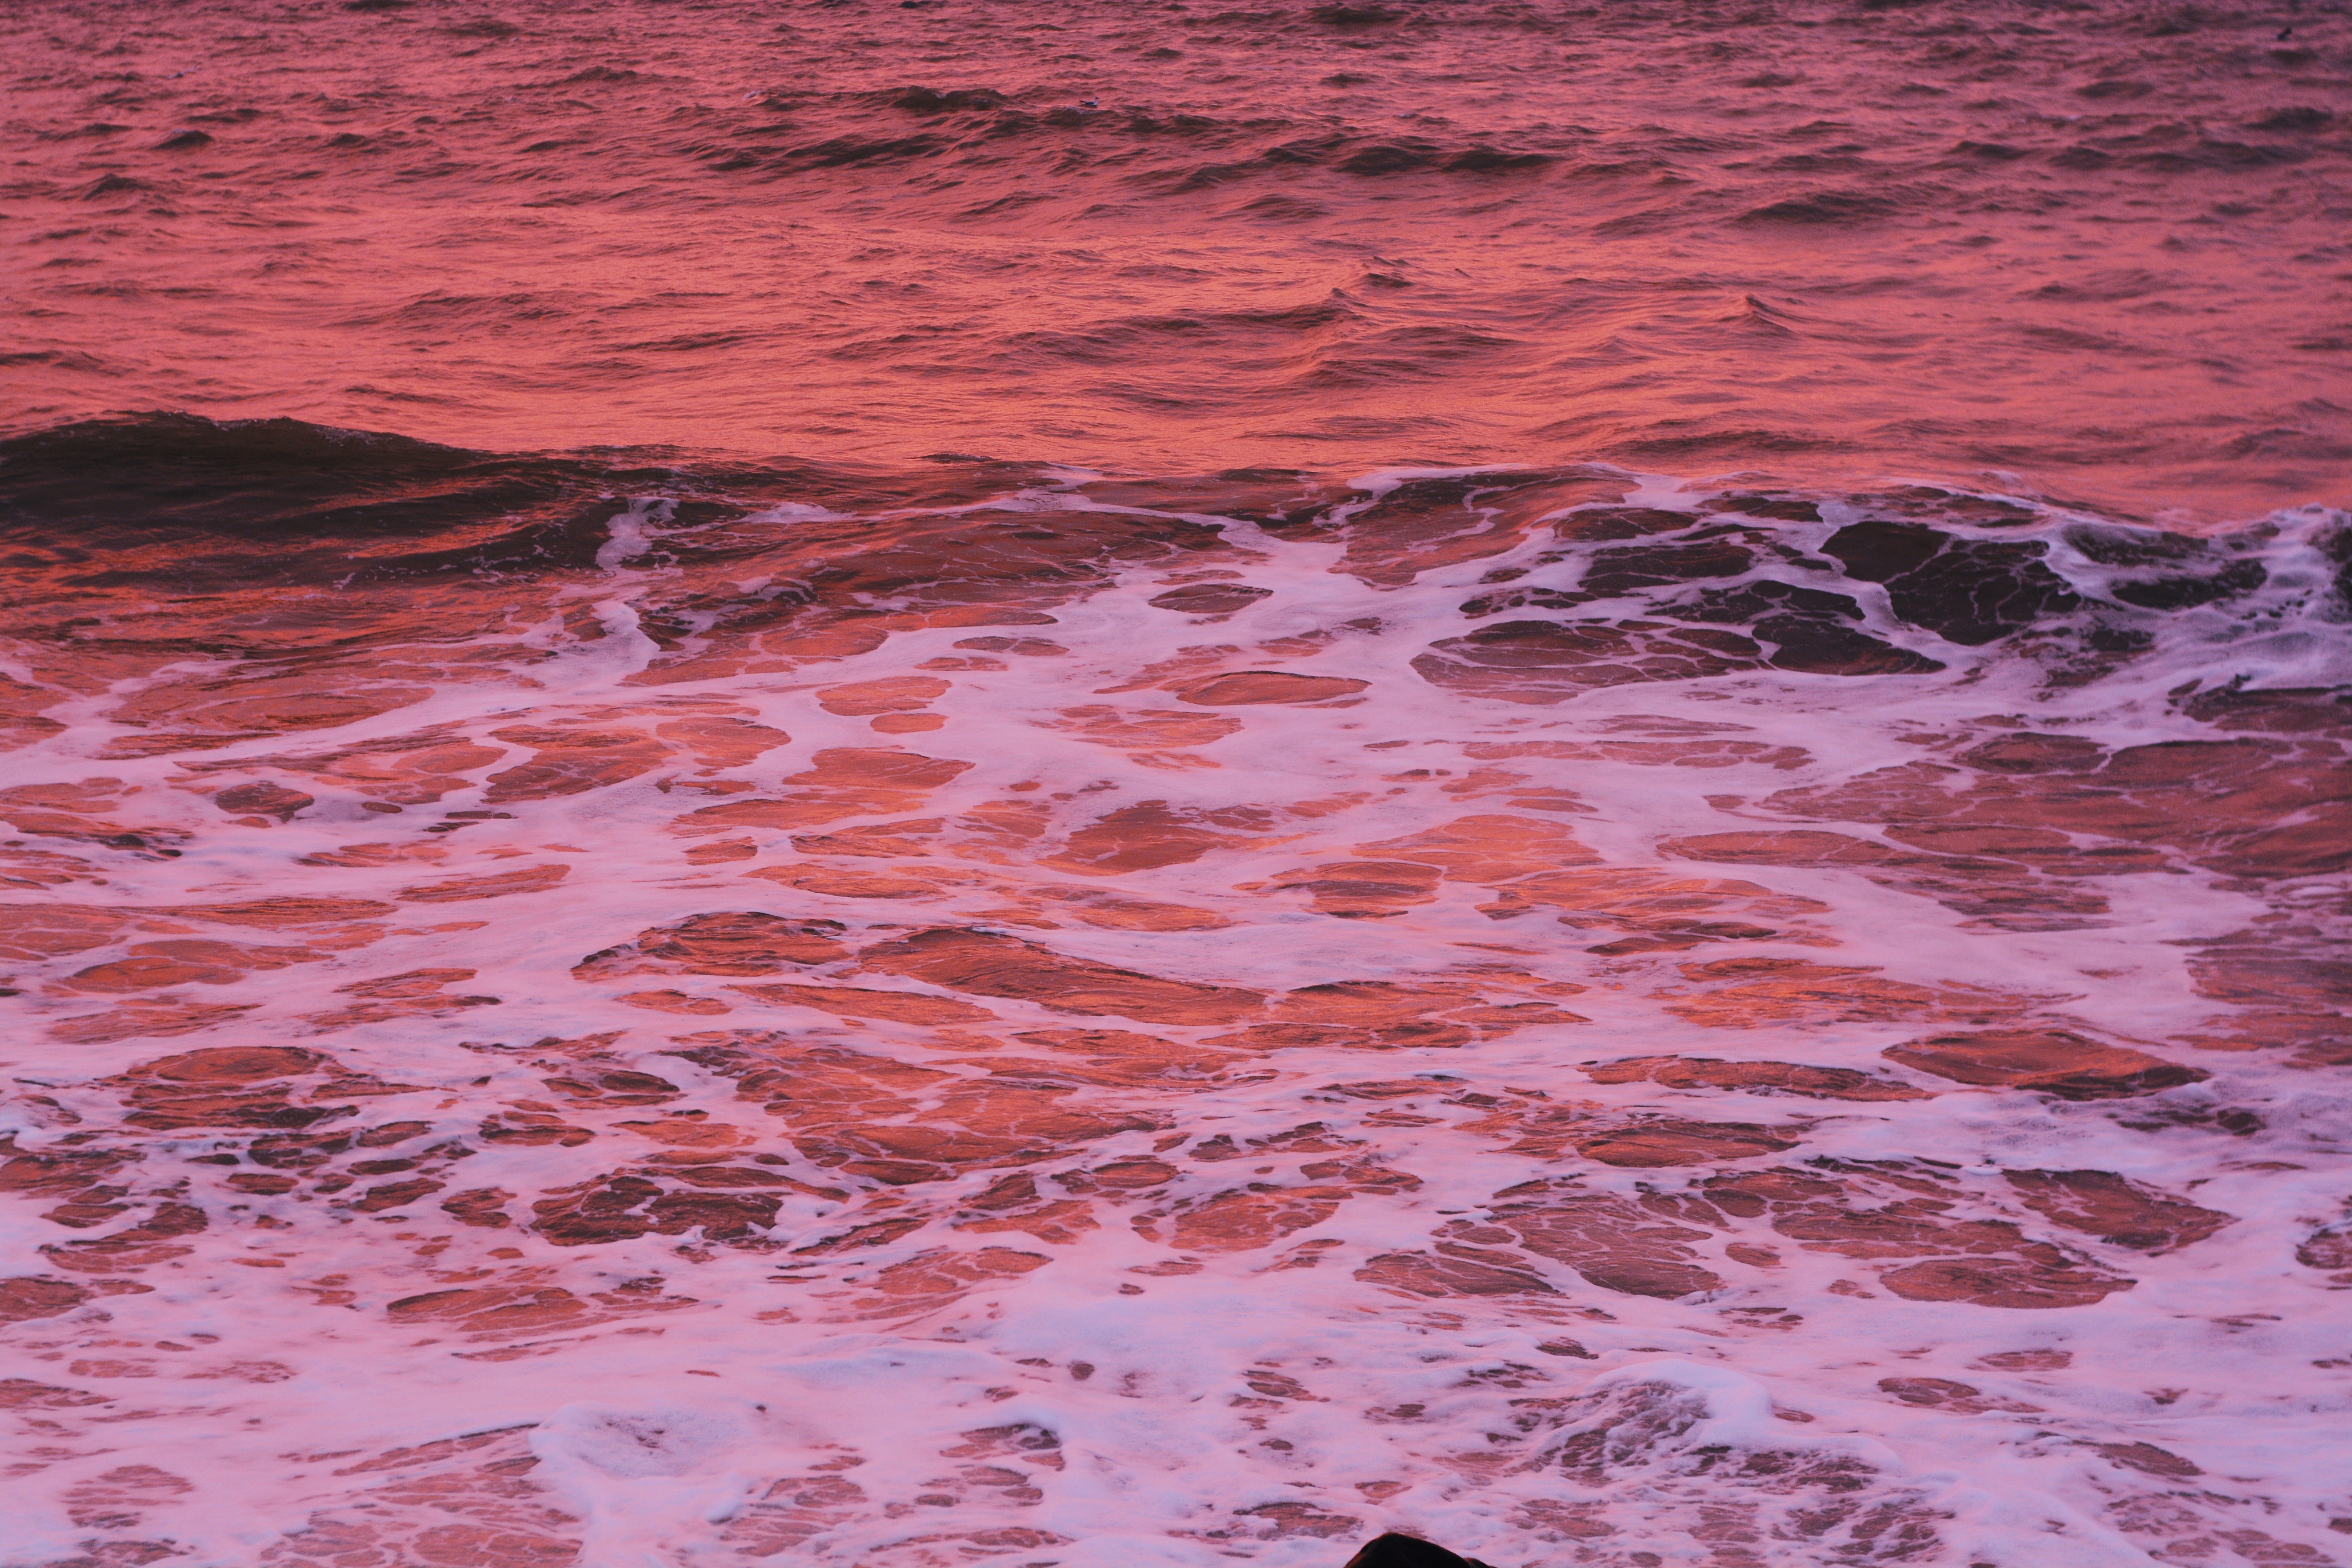 Wallpaper / land, full frame, pink color, wave, vsco, day, sea, no people, aquatic sport, beach, outdoors, sport, motion, flowing water, 5K, tranquility, ocean, view free download